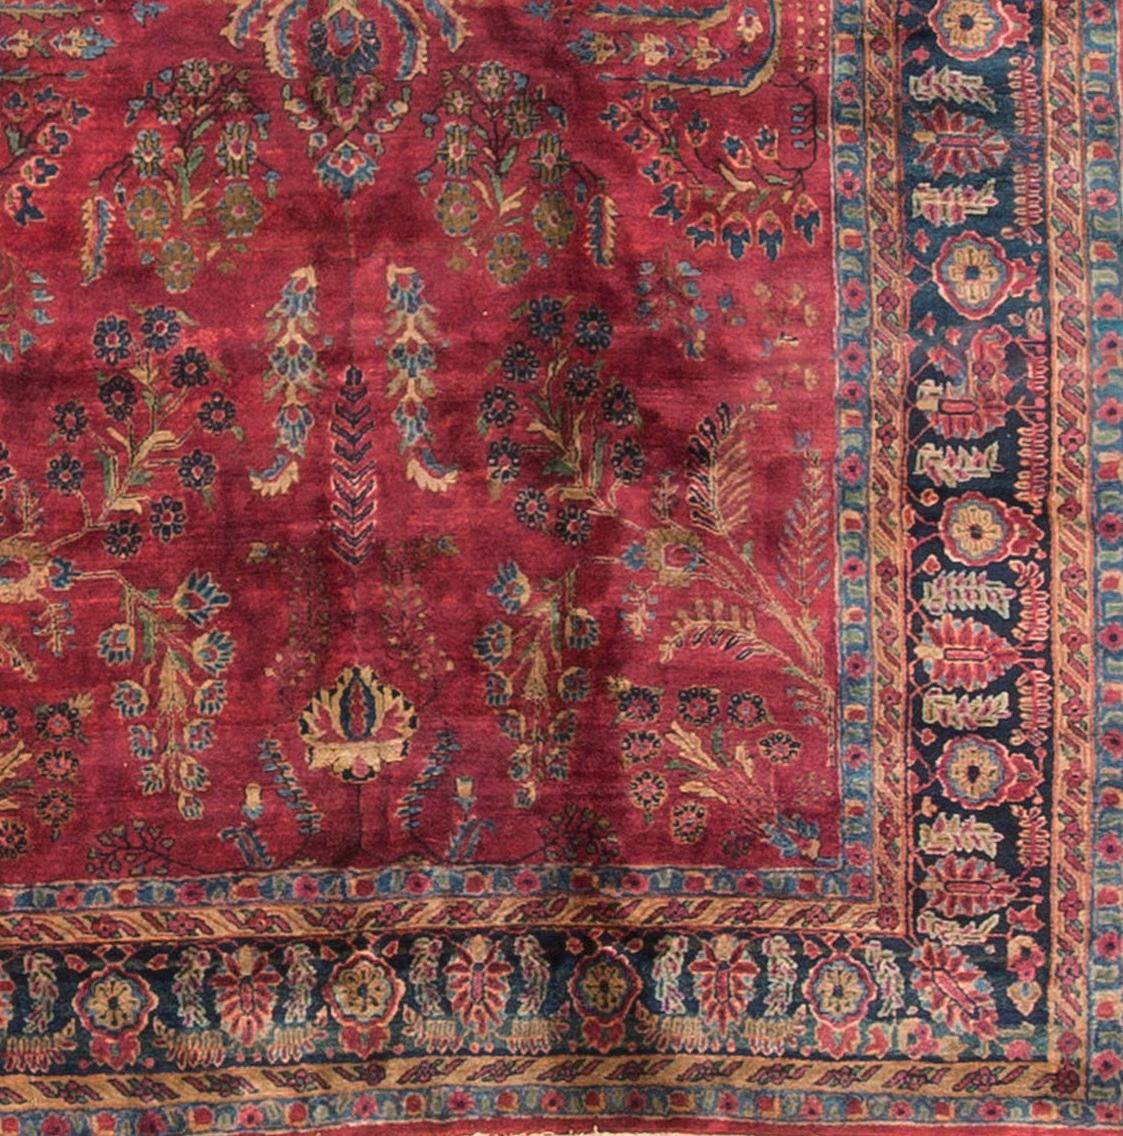 The vintage rugs of Sarouk, from the Arak province town of that name and surrounding villages, were created to satisfy American demand for a very thick, dense, very long wearing carpet with enough oriental touches to make them instantly